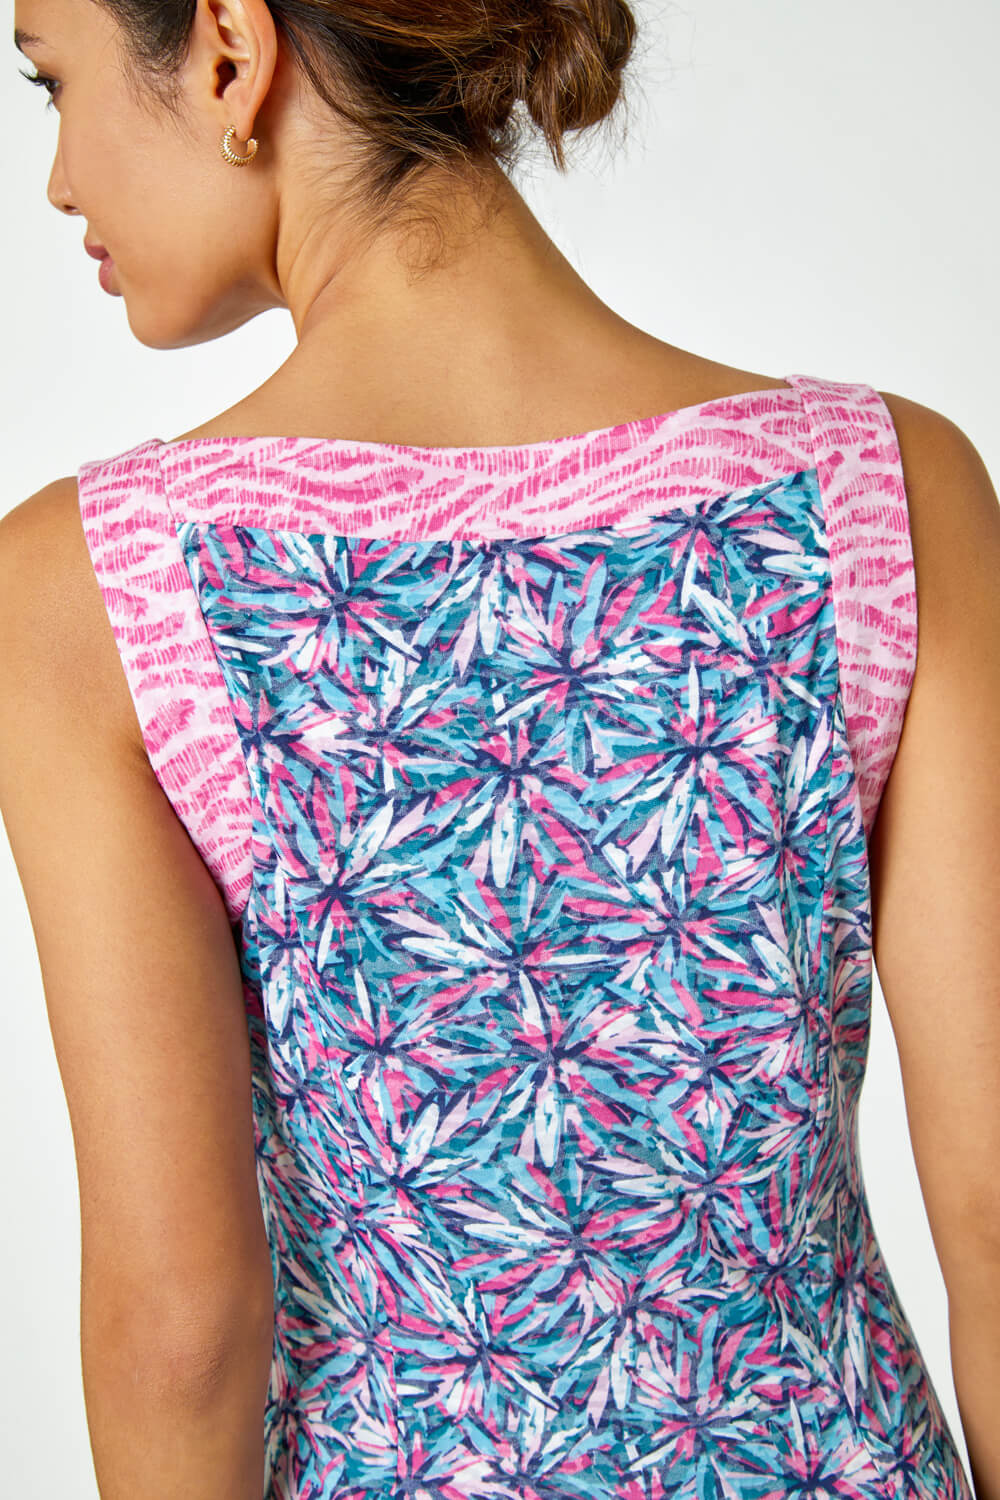 PINK Sleeveless Contrast Floral Print Dress, Image 5 of 5